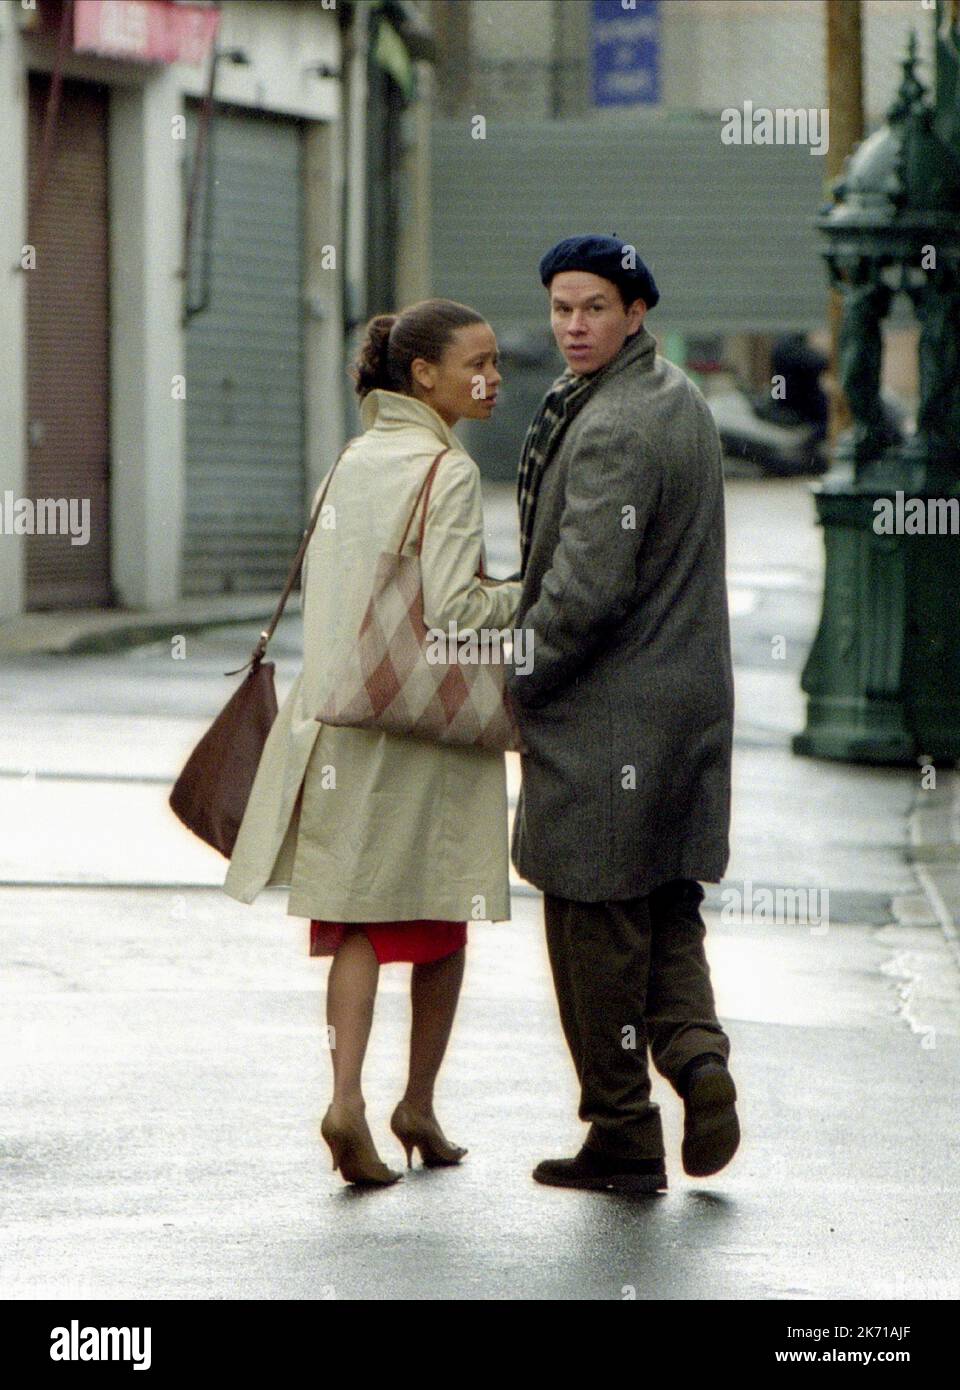 THANDIE NEWTON, MARK WAHLBERG, THE TRUTH ABOUT CHARLIE, 2002 Stock Photo